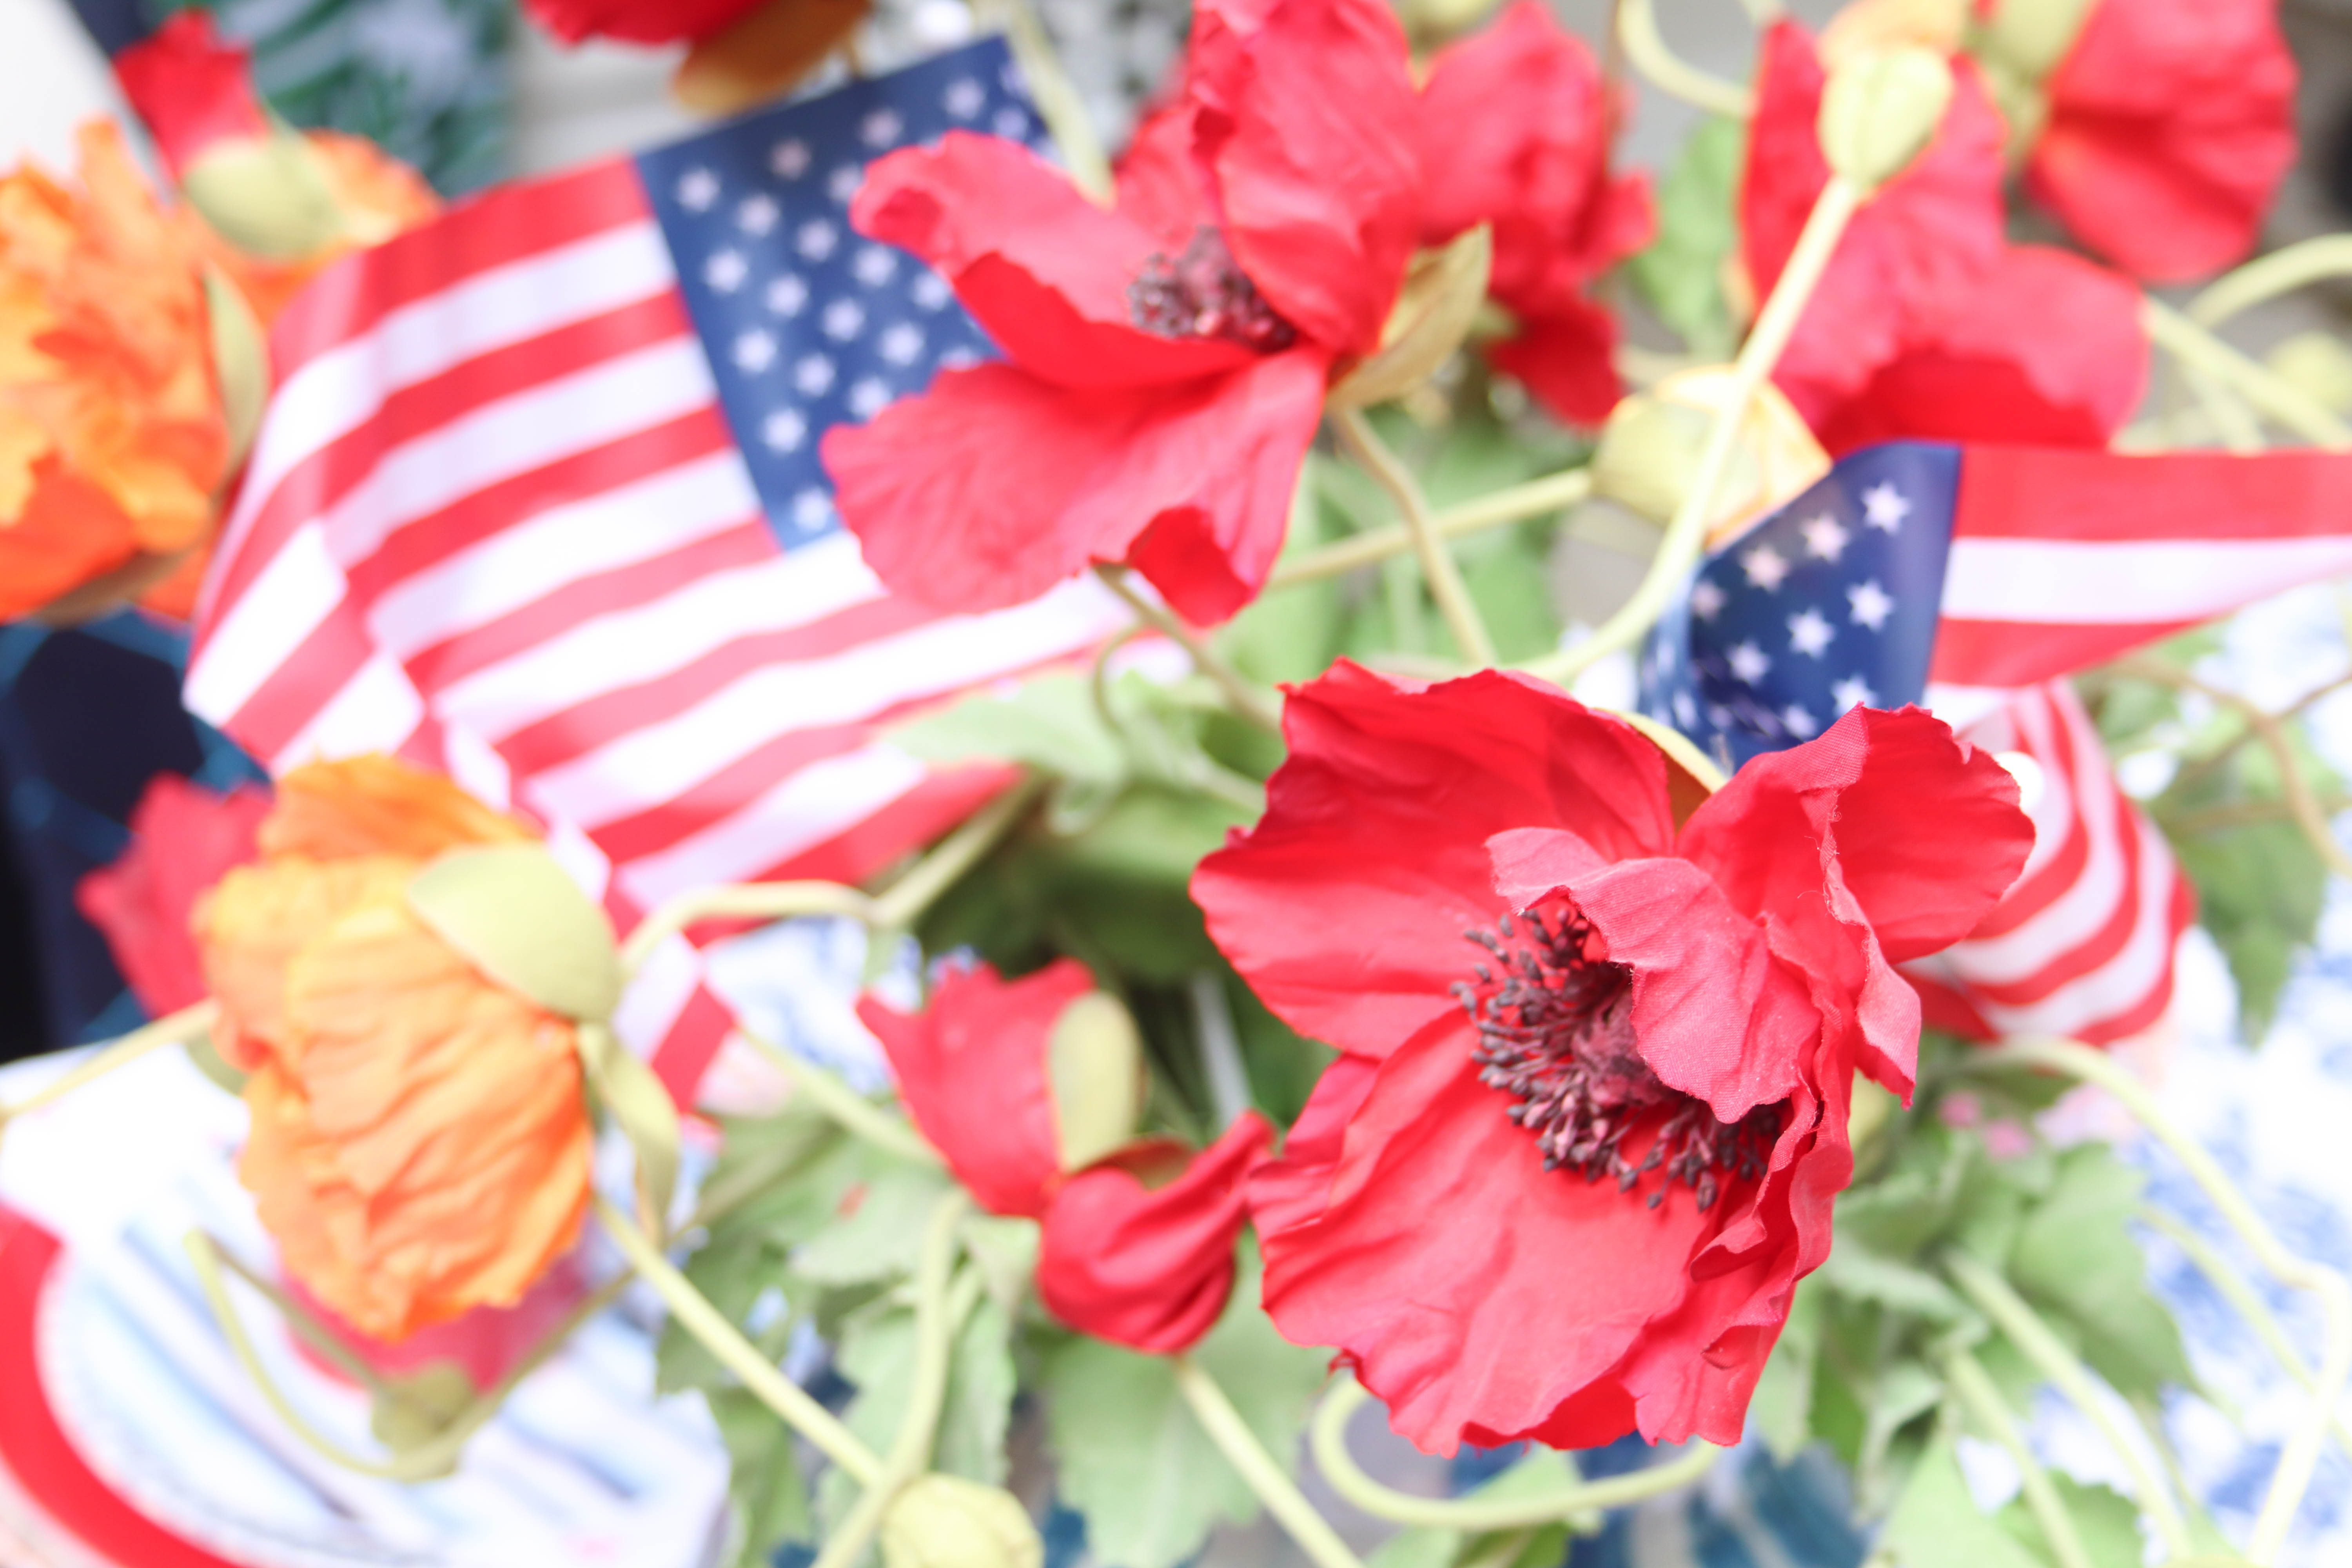 4th of July Table Decoration Ideas: Faux red poppies and small American flags in a centerpiece display for the Memorial Day Table.